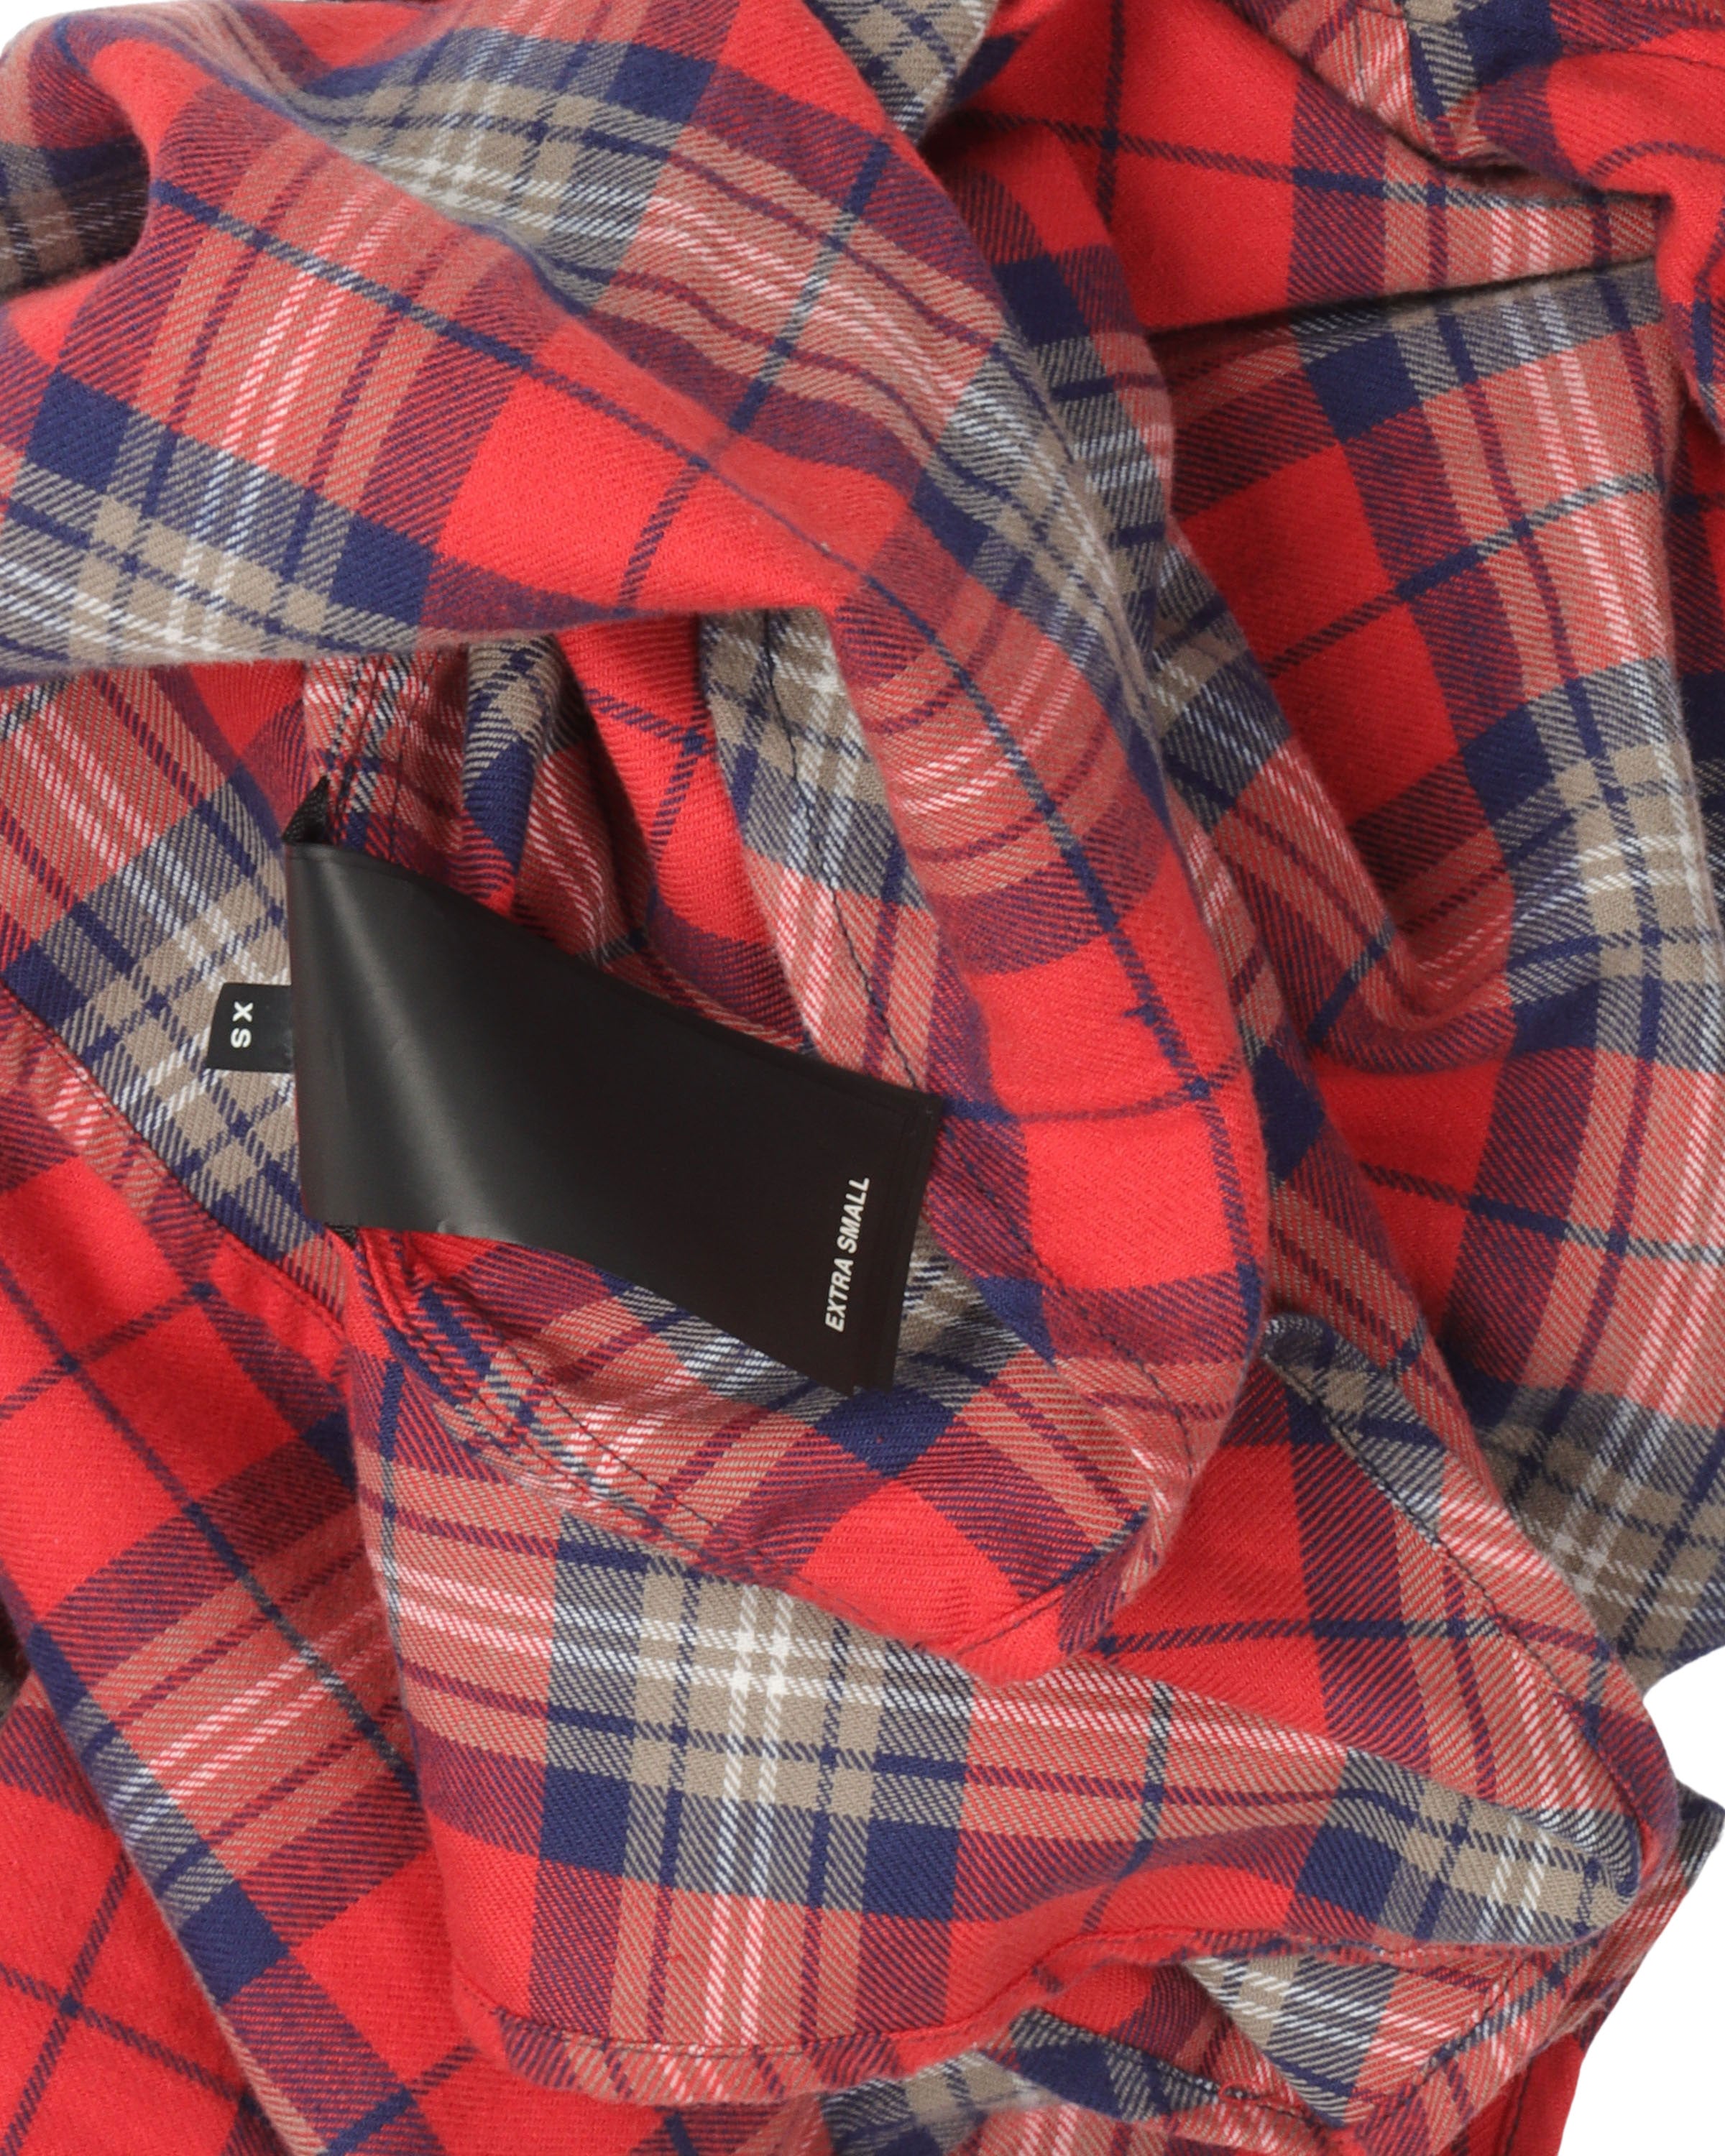 Sixth Collection Flannel Shirt